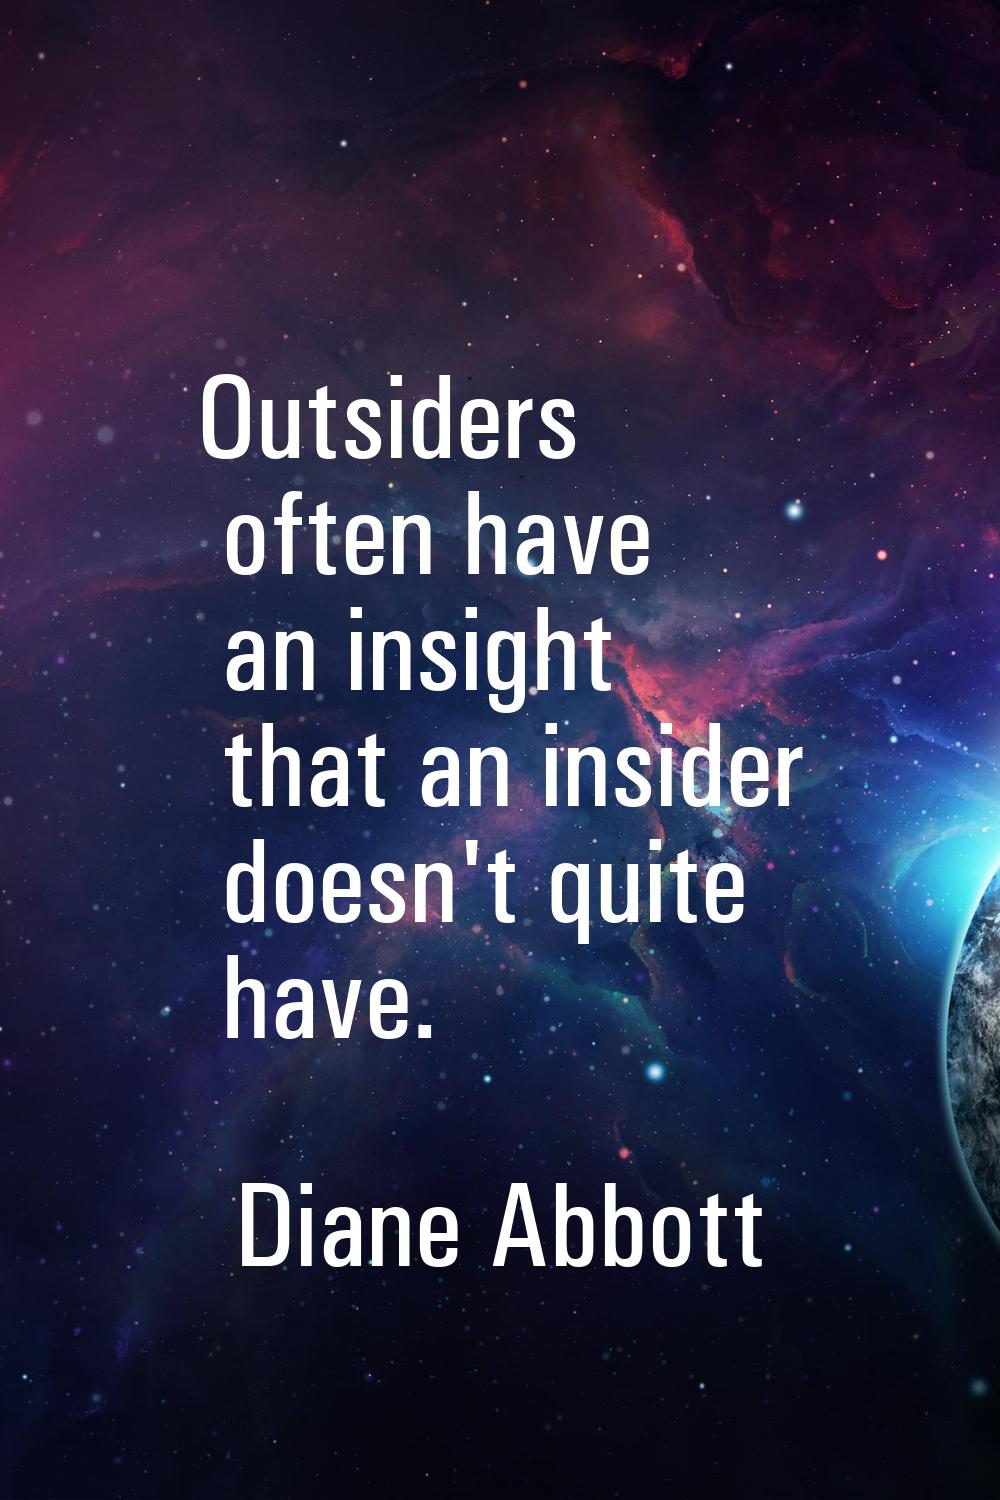 Outsiders often have an insight that an insider doesn't quite have.